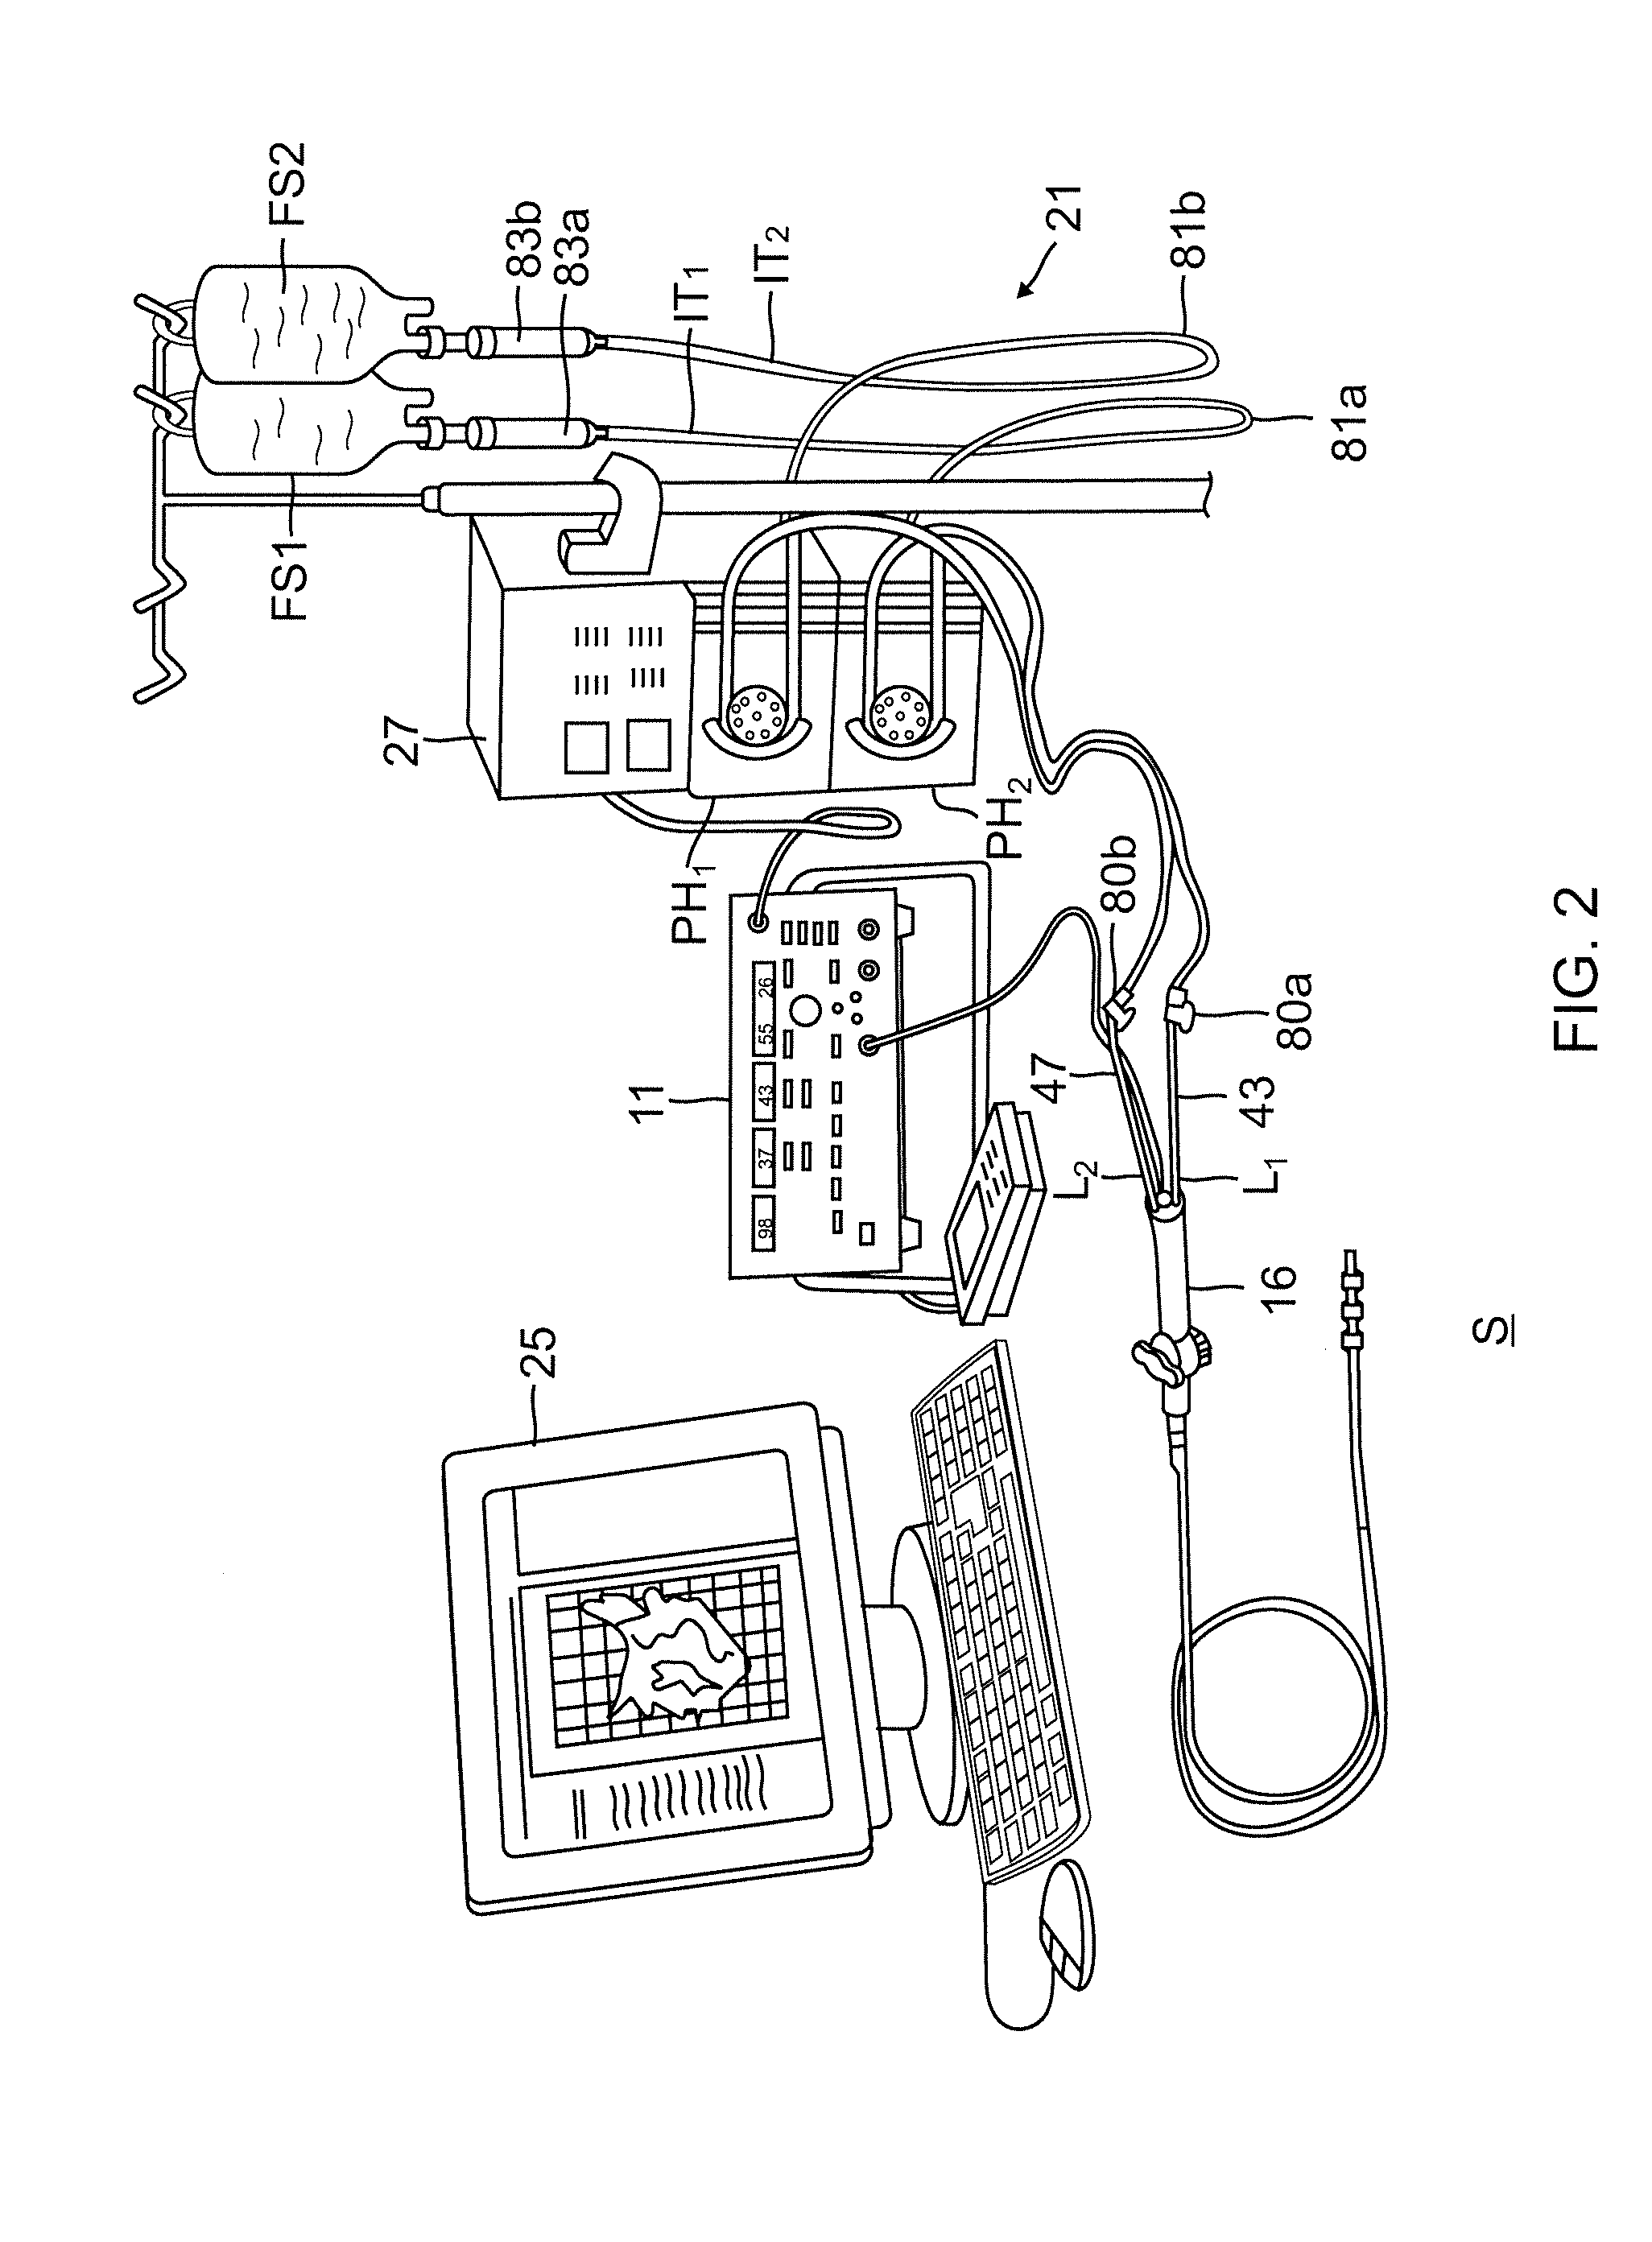 Integrated ablation system using catheter with multiple irrigation lumens